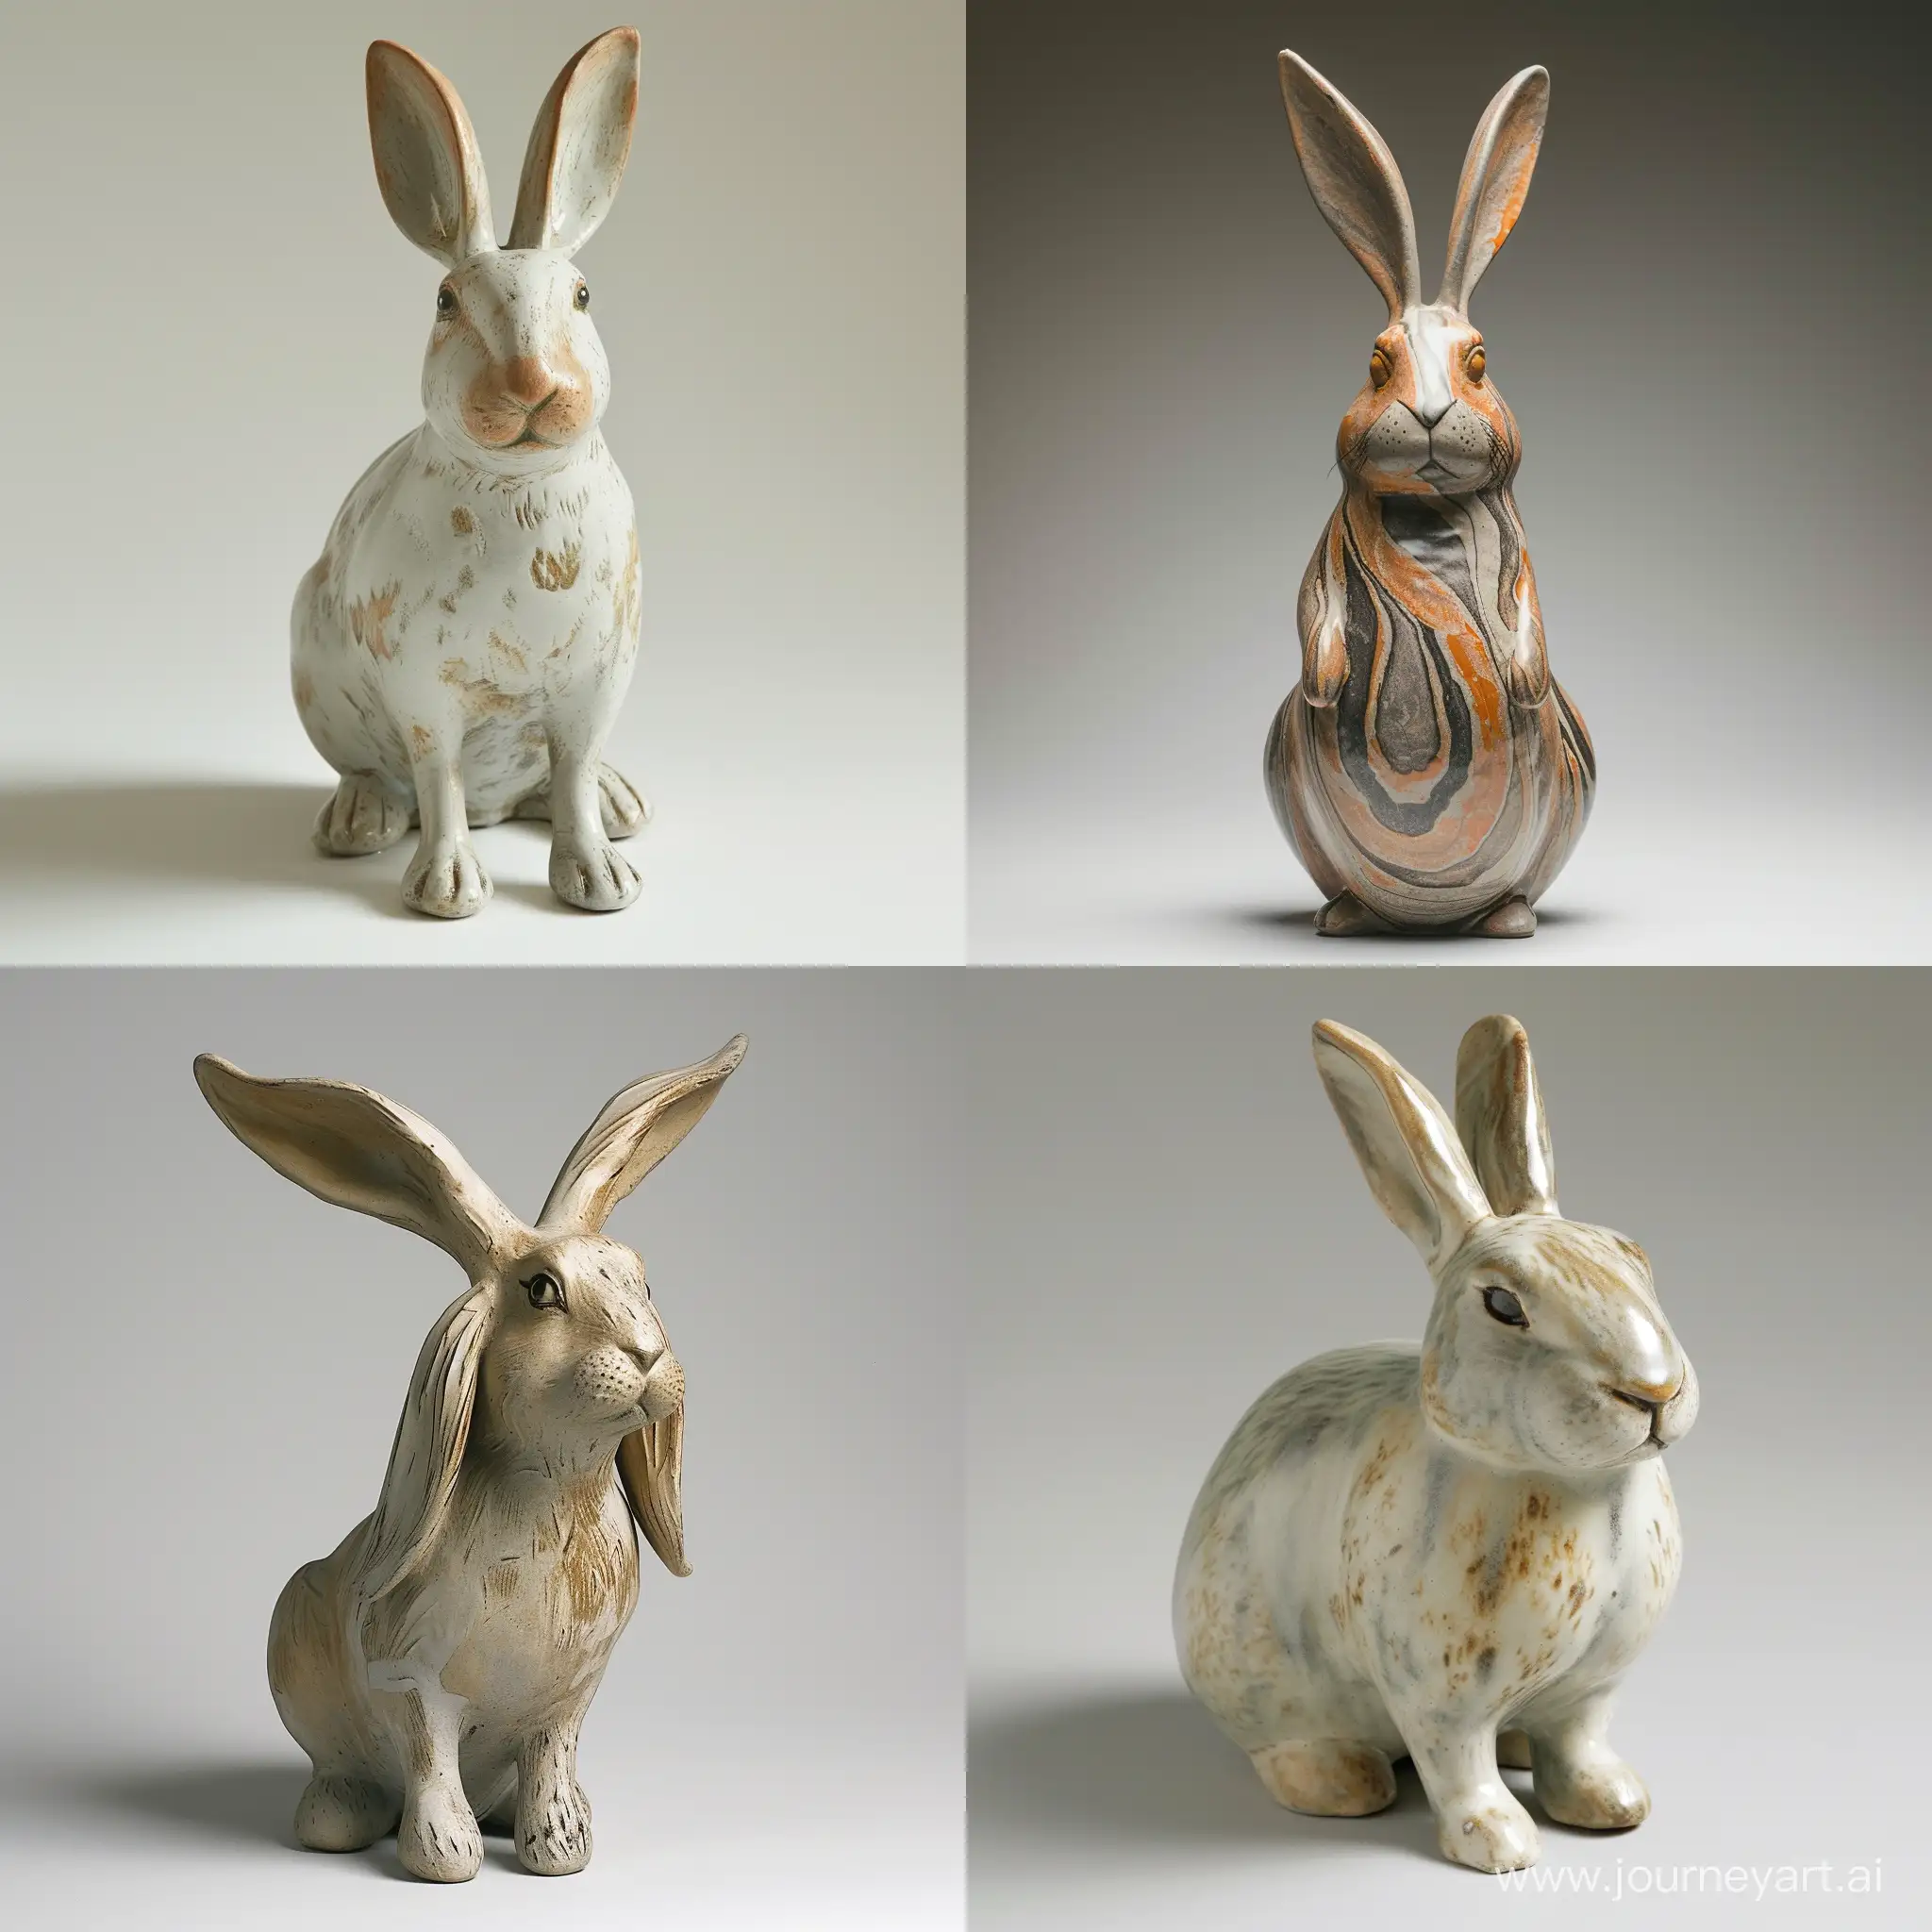 Positively-Standing-Ceramic-Rabbit-with-ForwardFacing-Stance